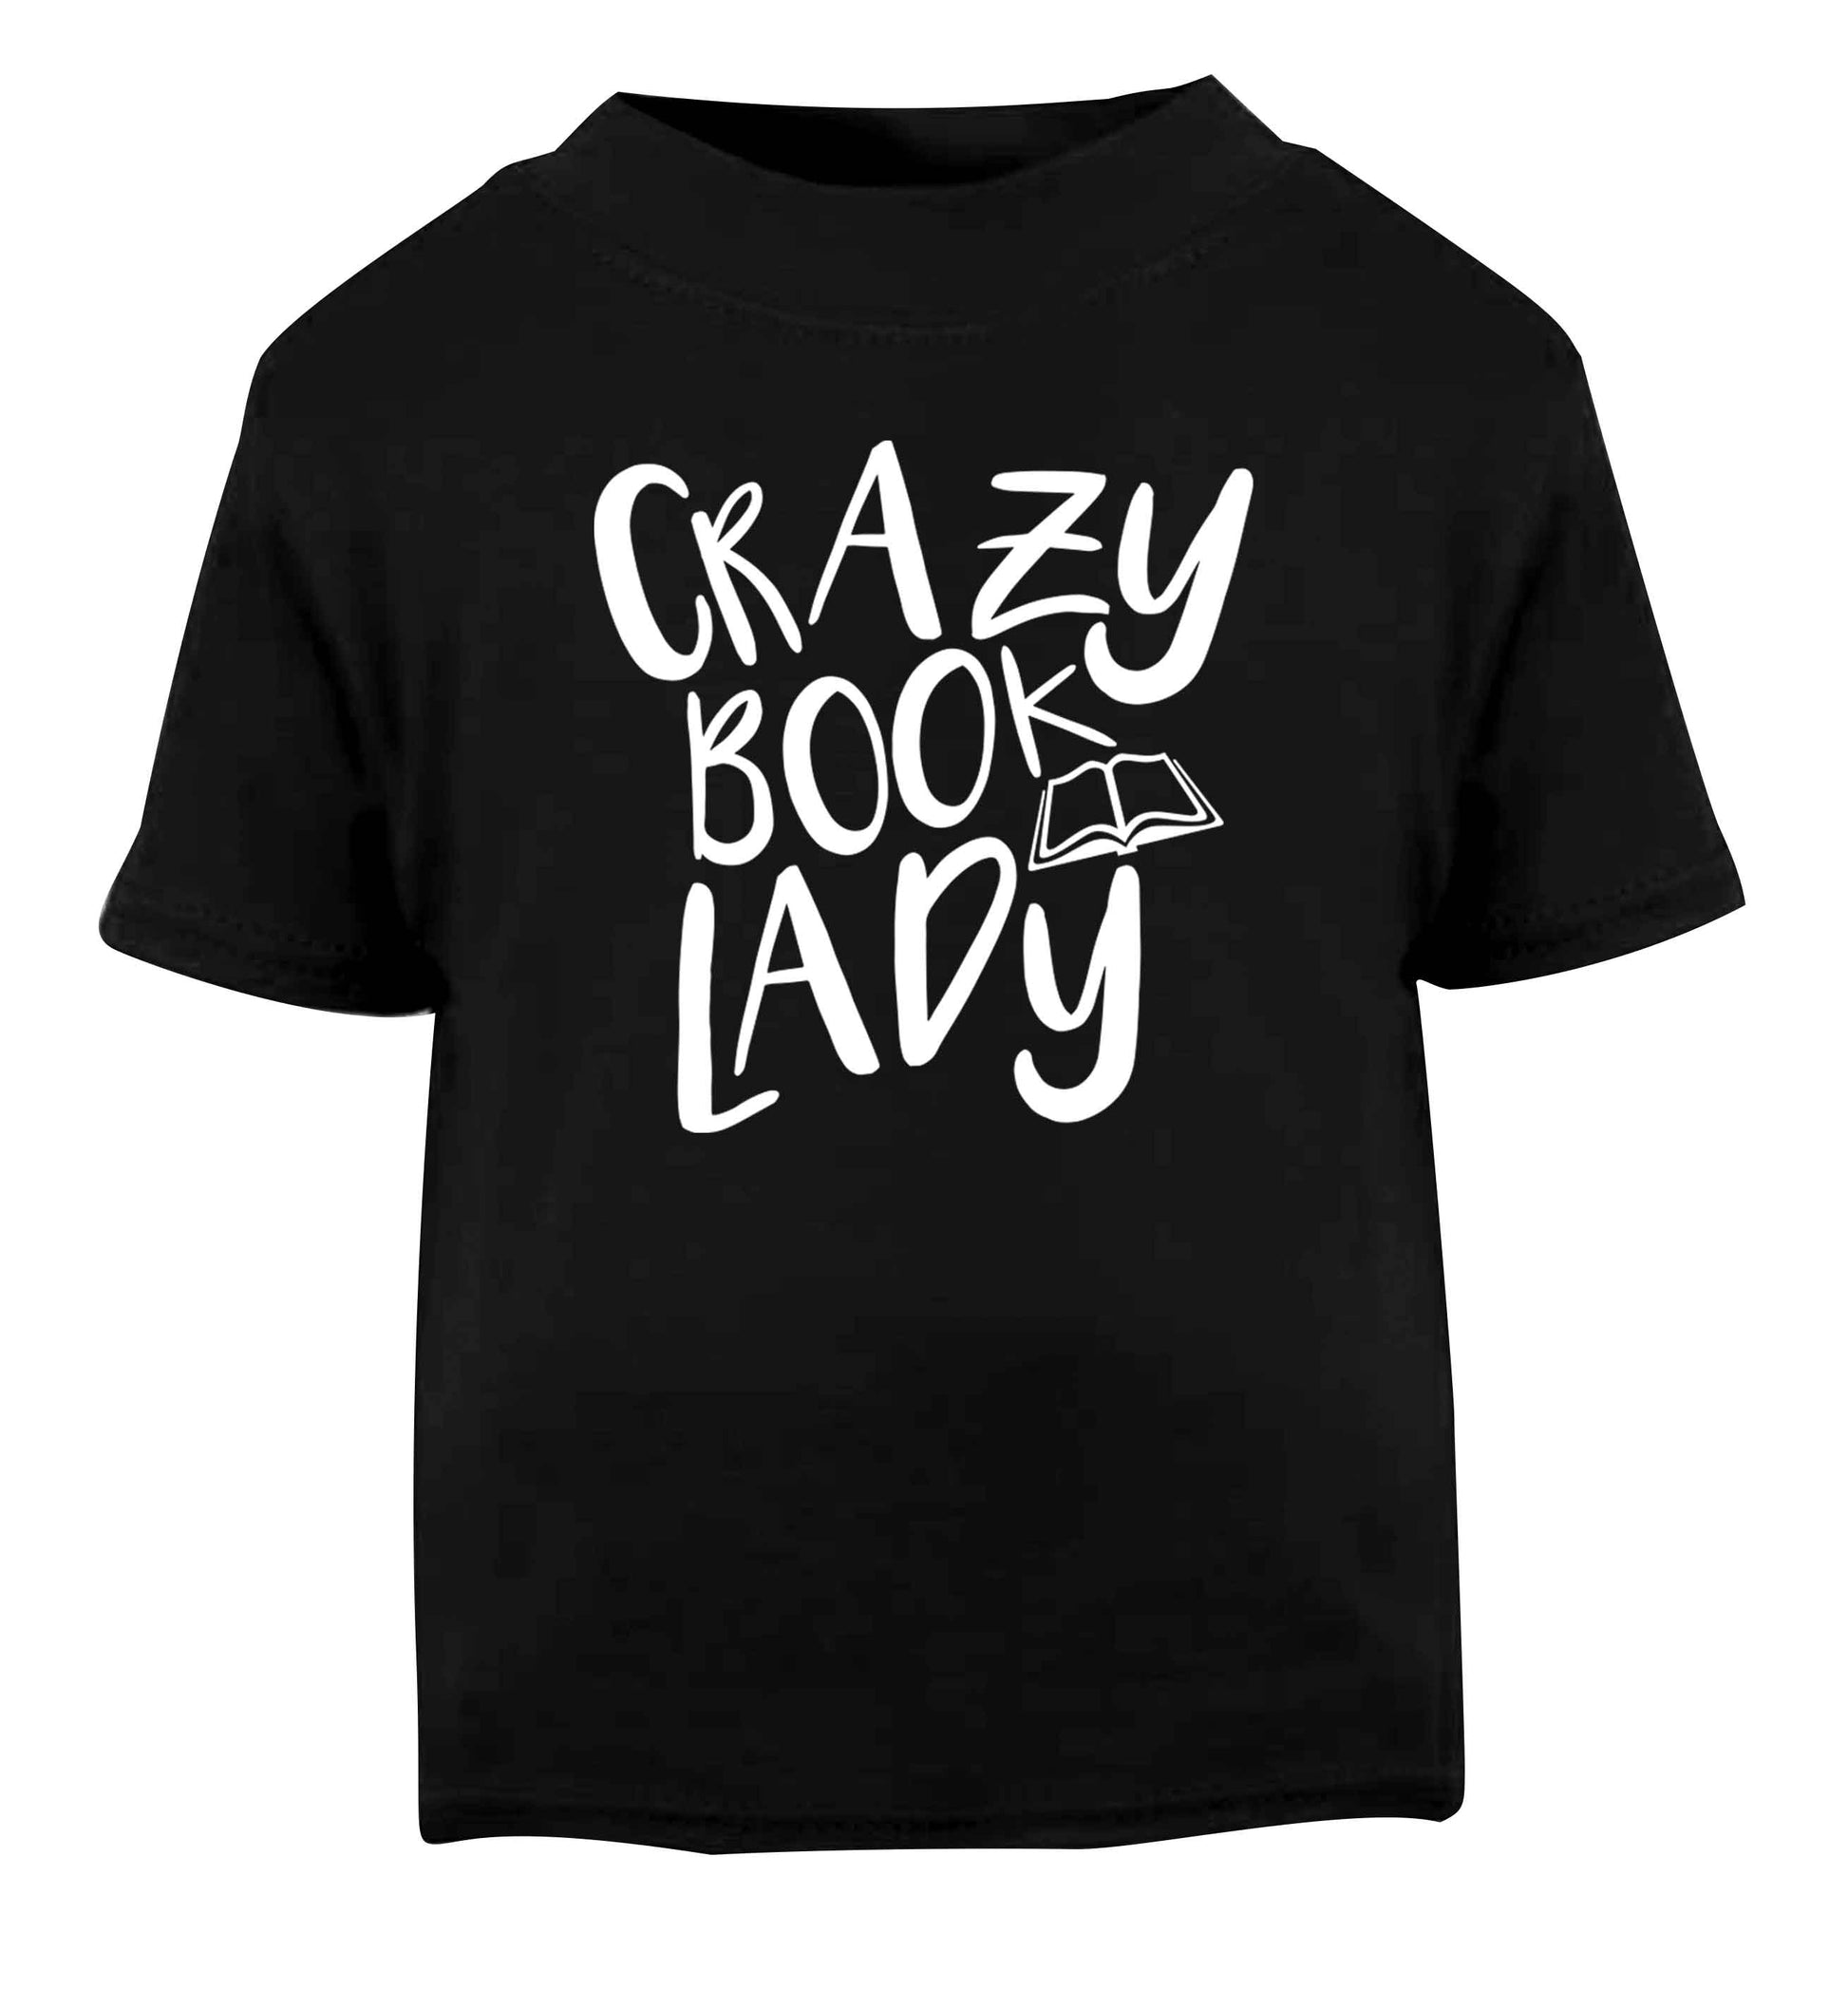 Crazy book lady Black Baby Toddler Tshirt 2 years